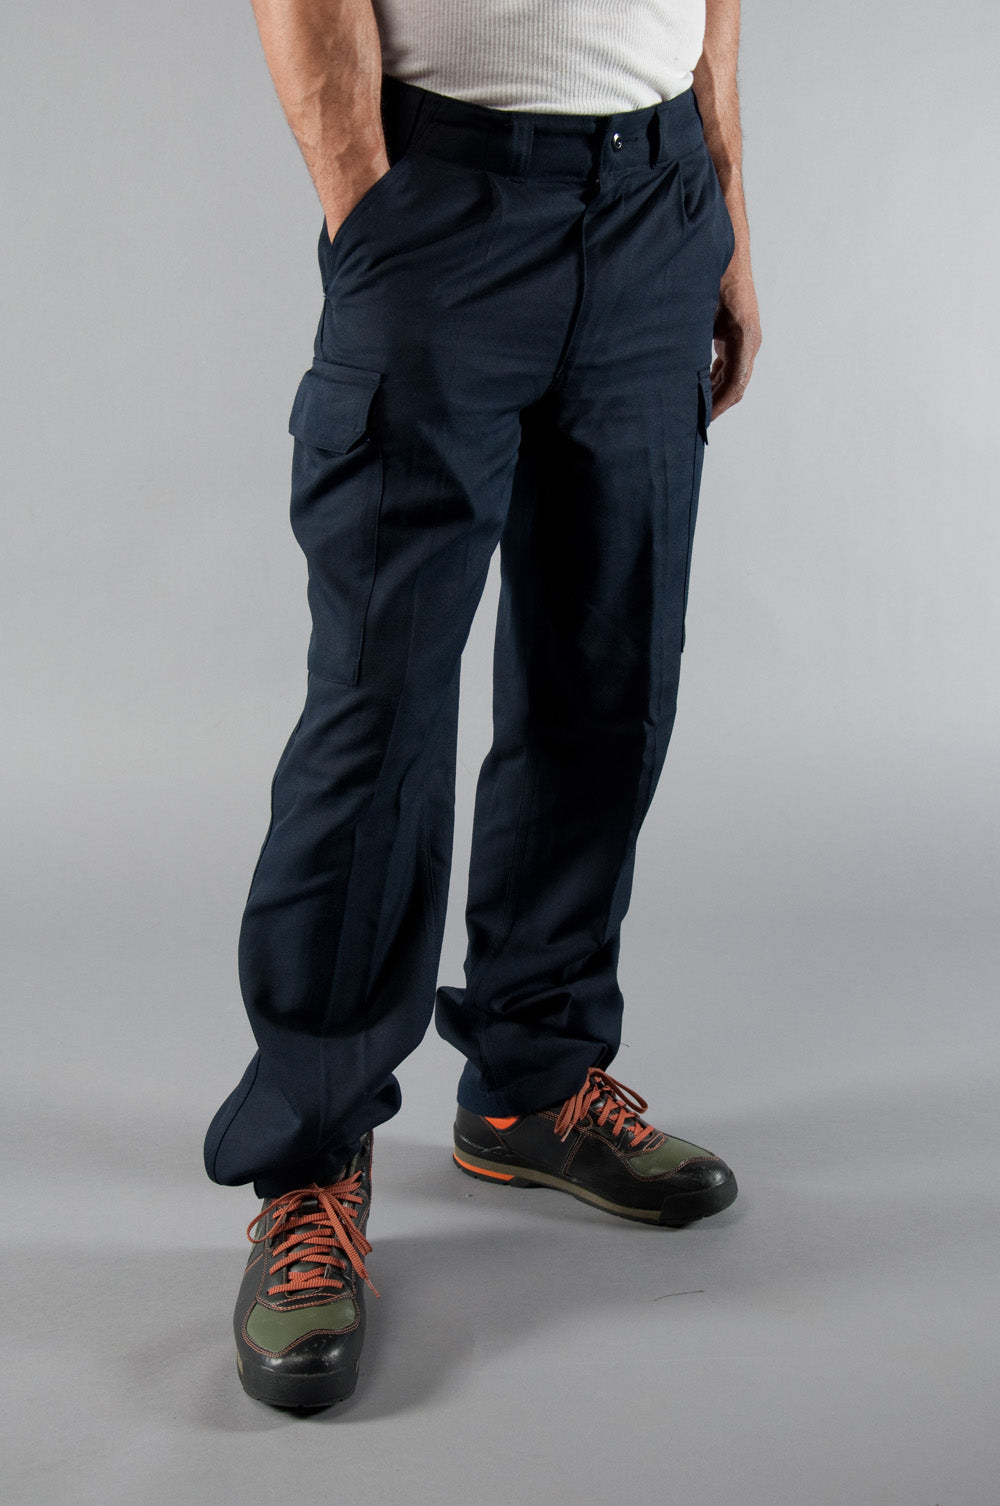 Straight Oxford Cargo Pants for Men | Old Navy